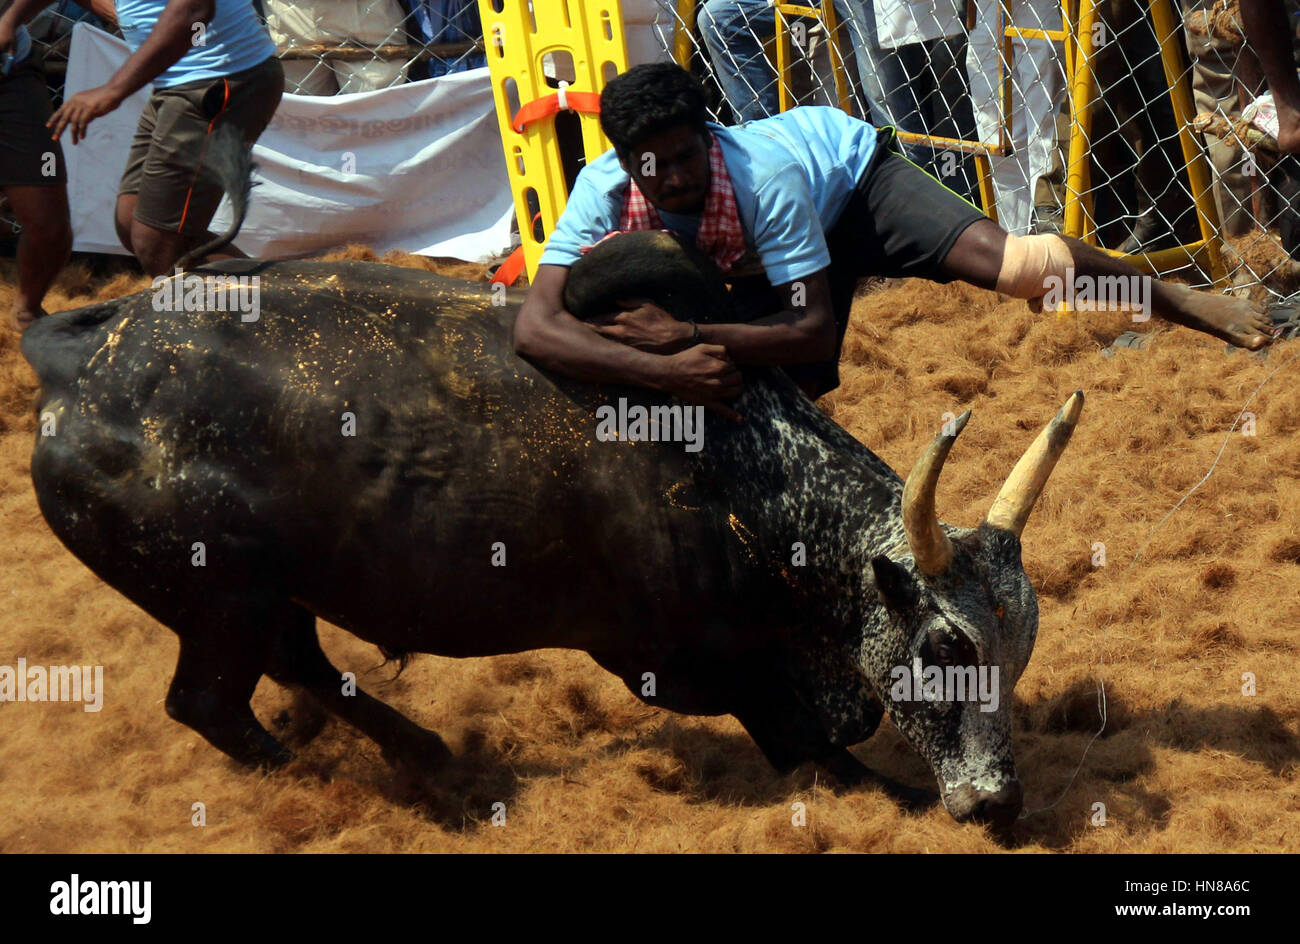 Palamedu, Indian state of Tamil Nadu. 9th Feb, 2017. An Indian tries to control a bull during a traditional bull-taming festival called Jallikattu in the village of Palamedu near Madurai, southern Indian state of Tamil Nadu, Feb. 9, 2017. Jallikattu was traditionally practiced as part of the harvest festival of Pongal. It involves men chasing bull attempting to grab its hump and ride it for as long as possible or stop it and remove piece of cloth affixed to its horns. Credit: Stringer/Xinhua/Alamy Live News Stock Photo